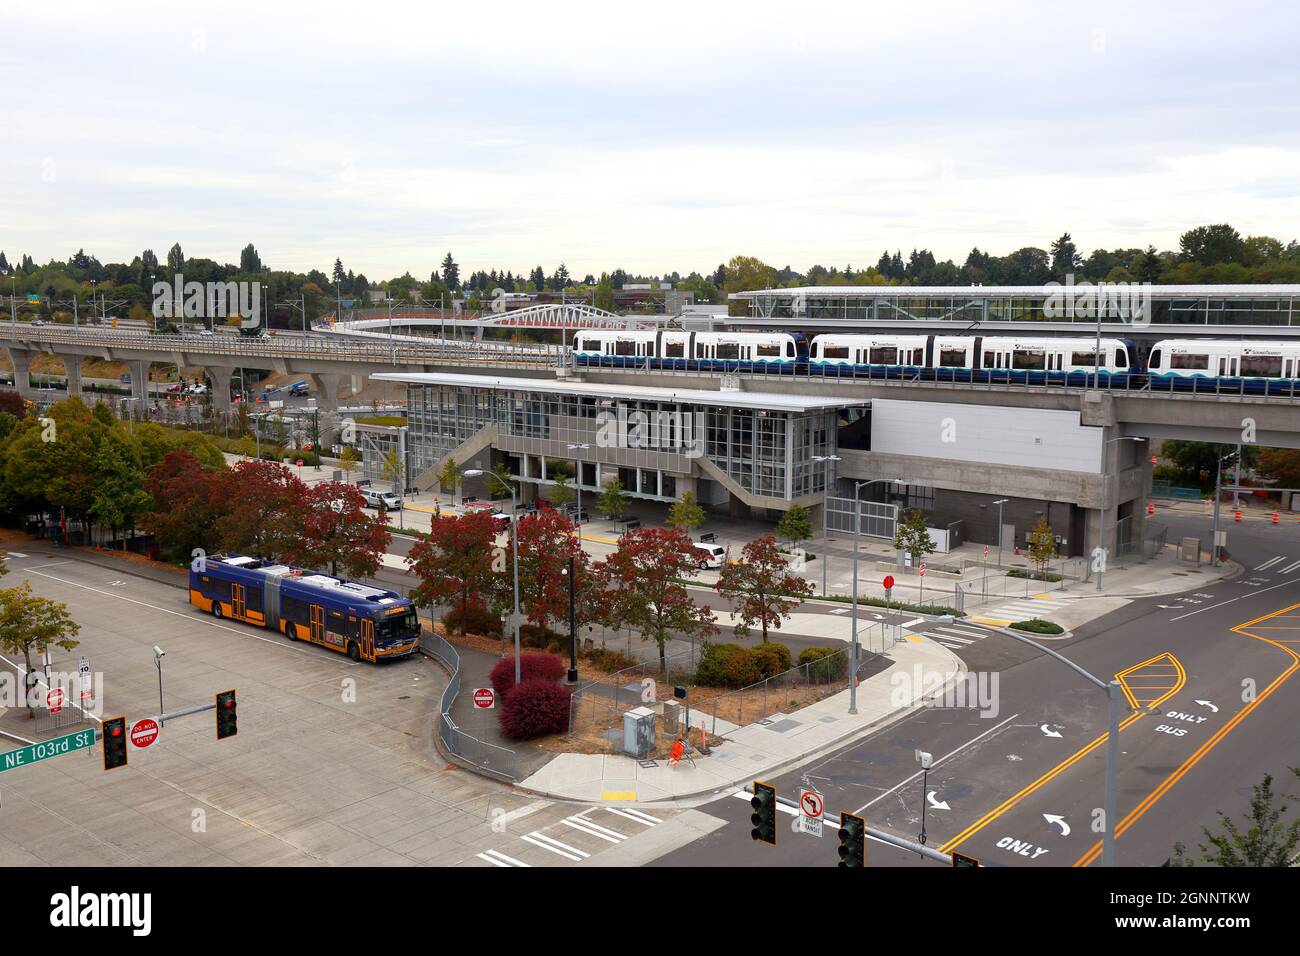 Sound Transit Northgate Station, NE 103rd St, Seattle, Washington. A bus and light rail intermodal transit center with park and ride facilities Stock Photo